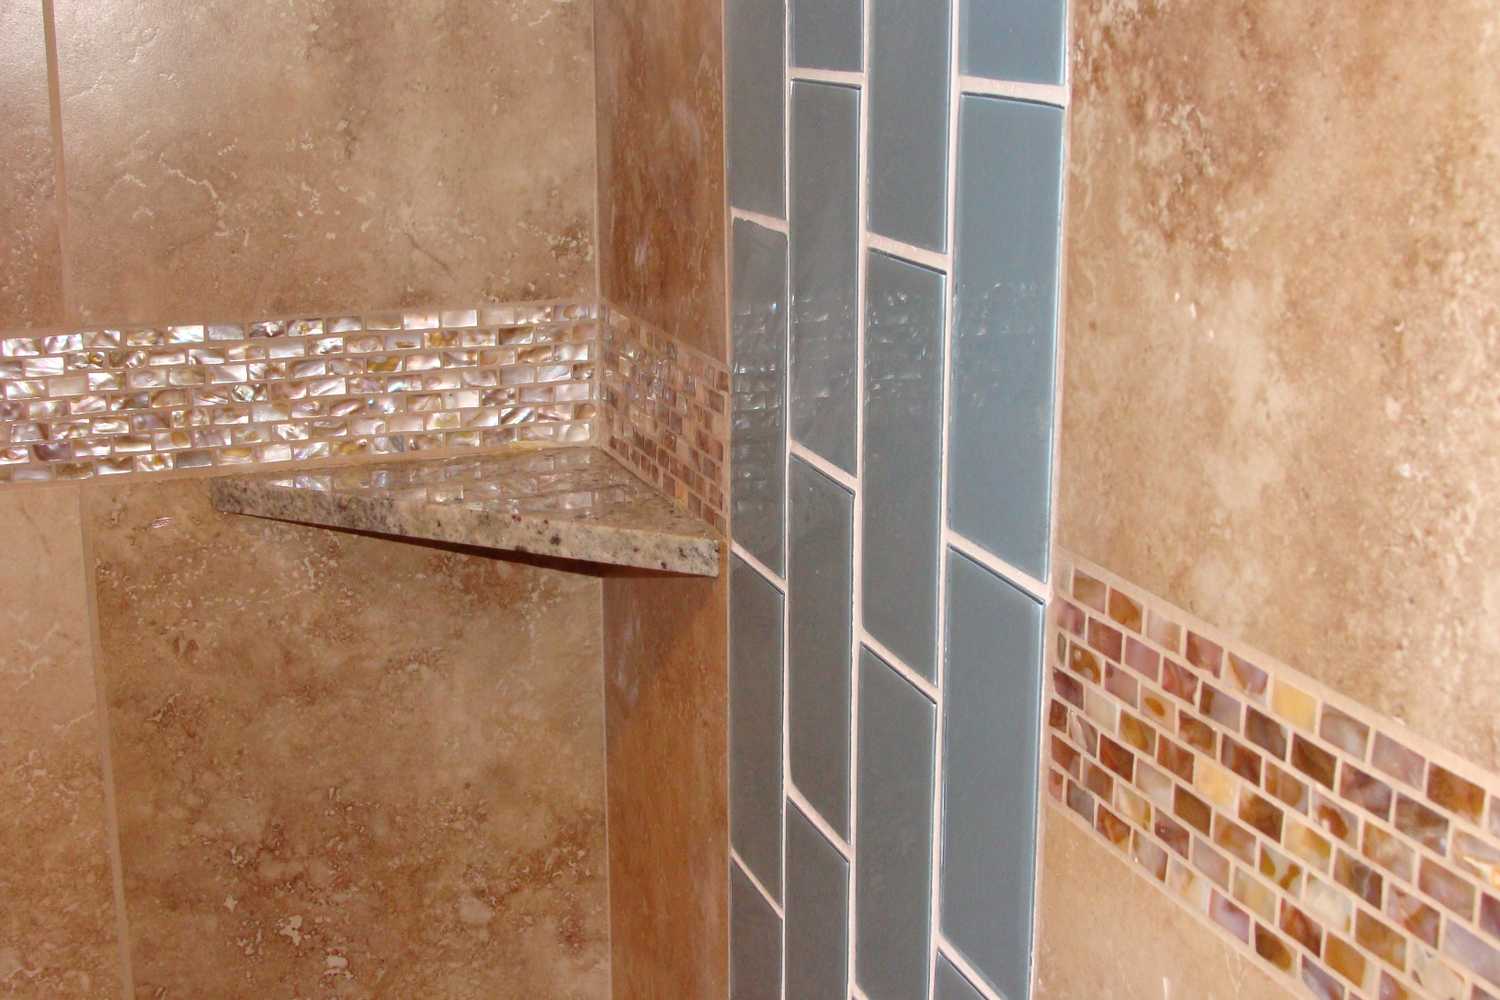 Projects by Pacific Coast Tile & Marble